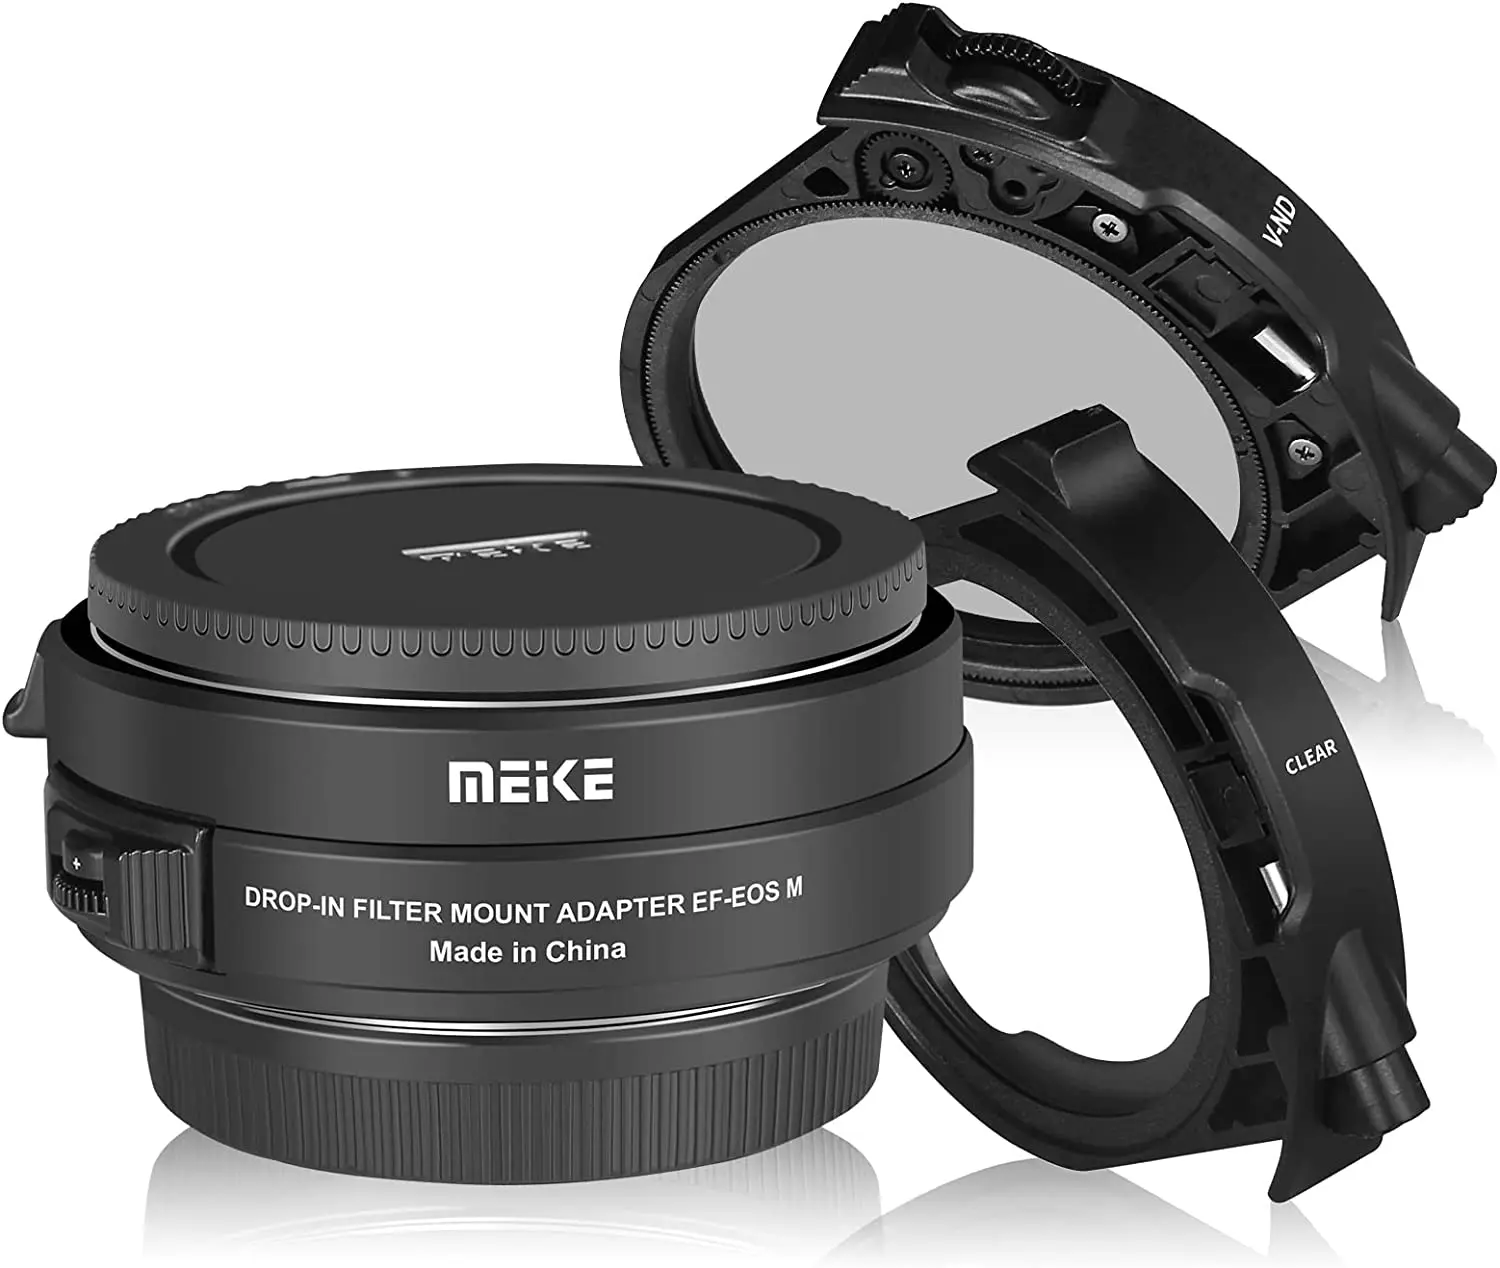 

Meike MK-EFTM-C AF Lens Adapter with Drop-In ND Filter and UV Filter for Canon EF Lens To EOS M M2 M3 M5 M10 M50 M50II M100 M200